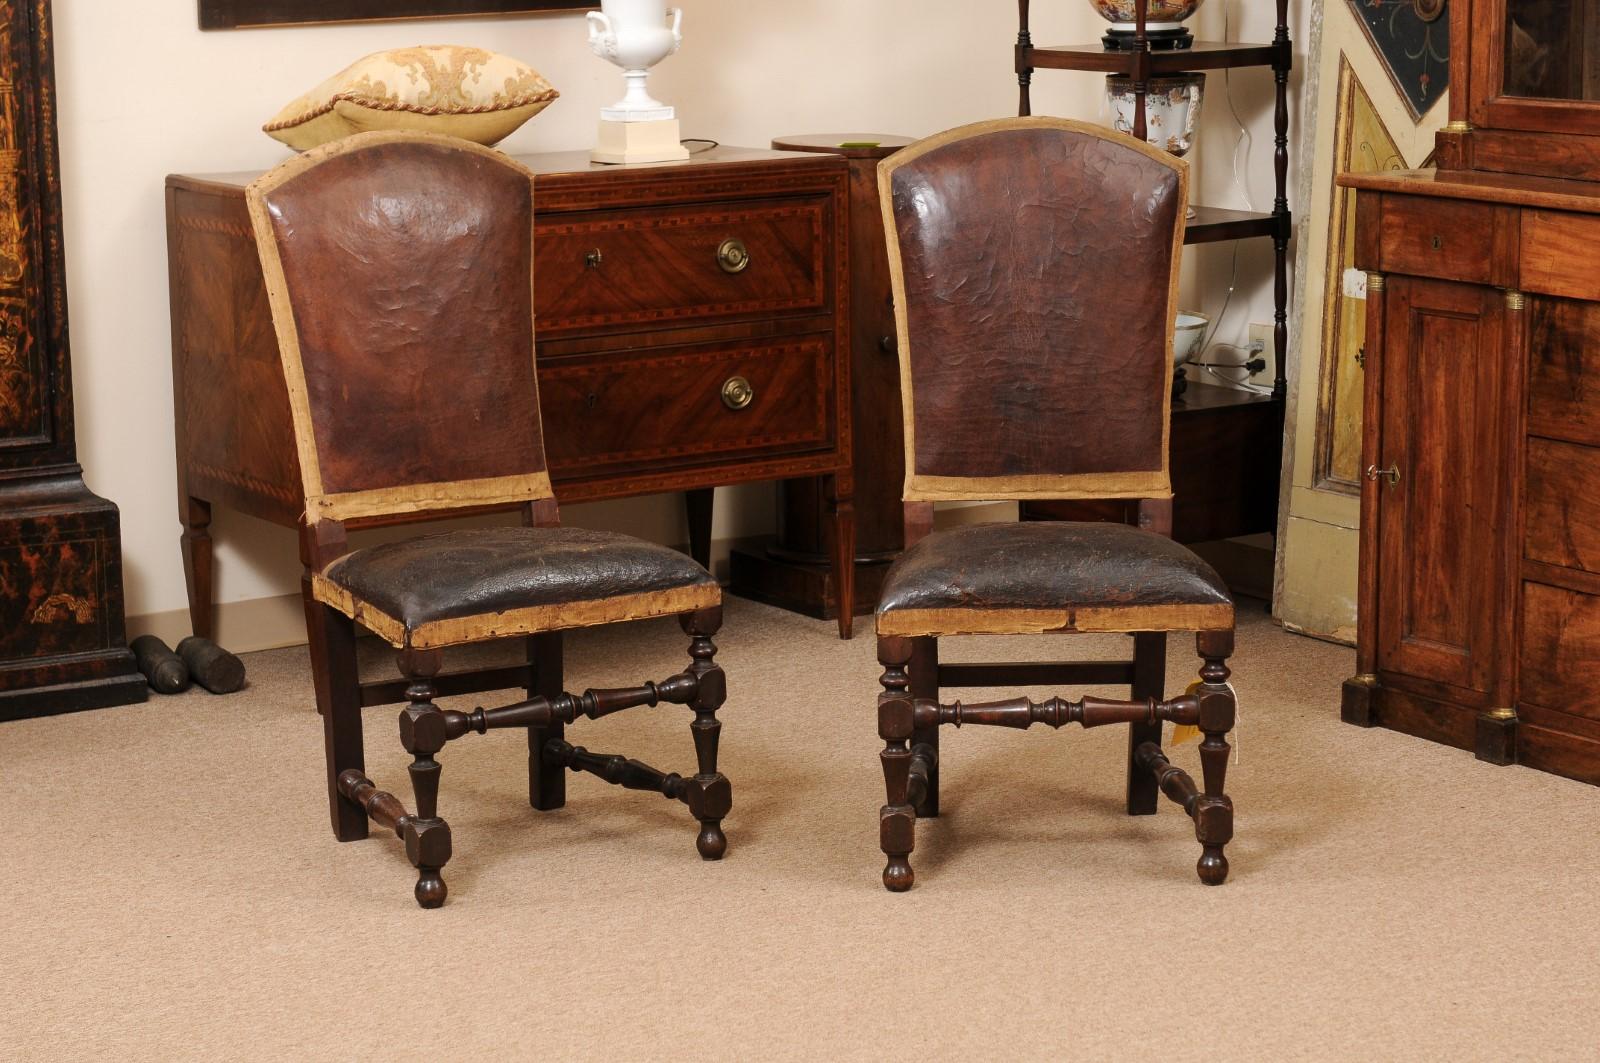 Pair of Large 18th Century Italian Walnut Hall Chairs with Leather Upholstery  In Good Condition For Sale In Atlanta, GA